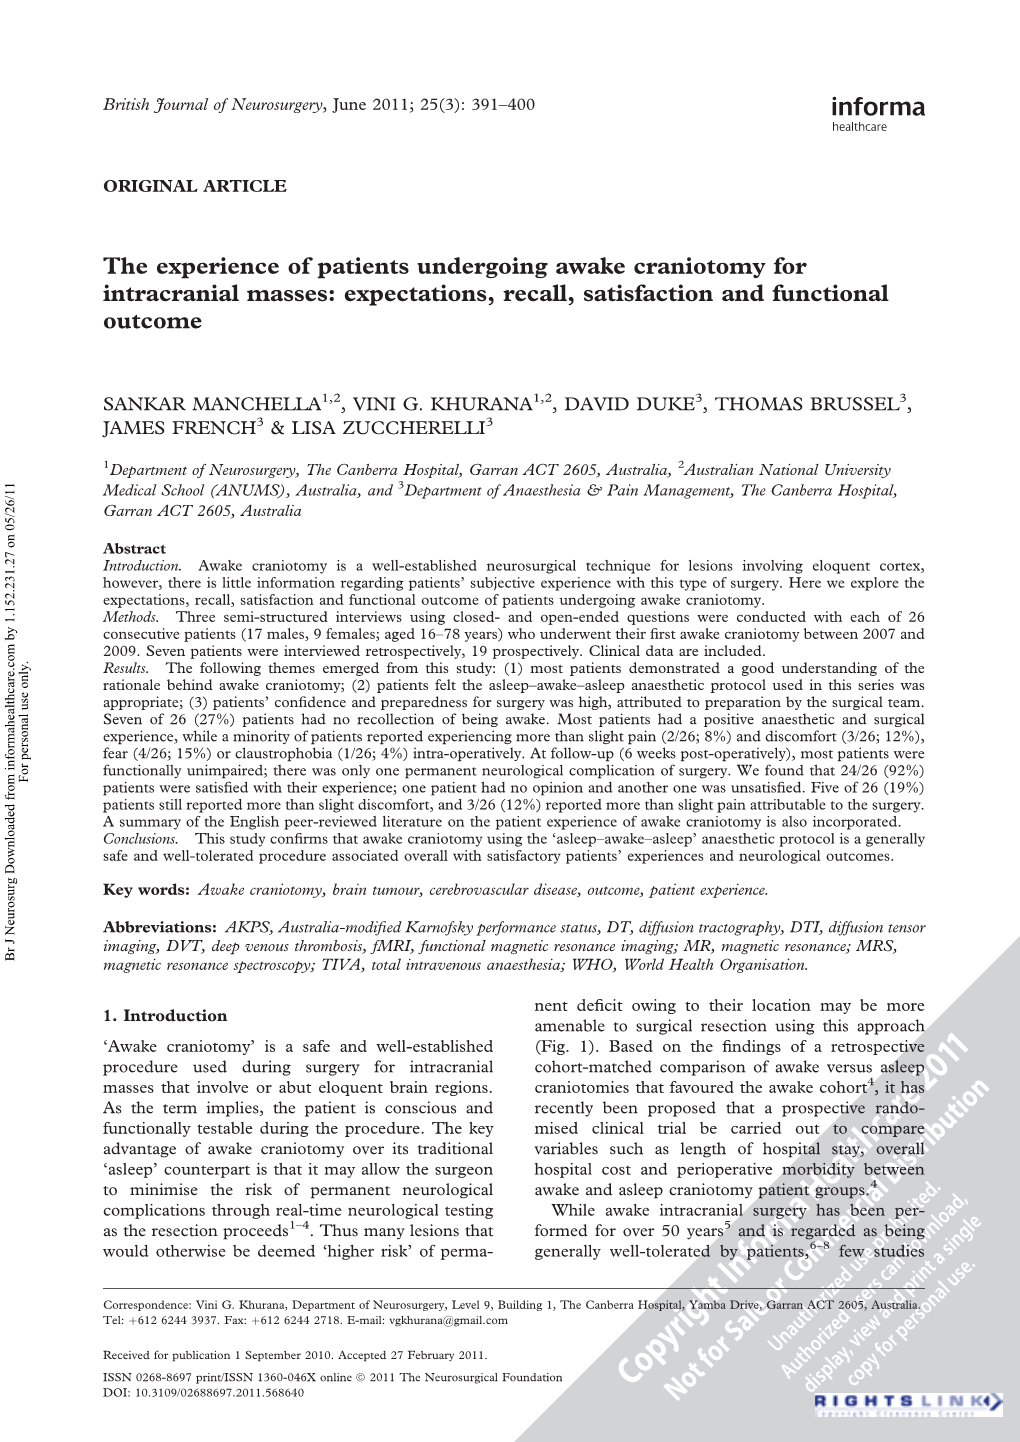 The Experience of Patients Undergoing Awake Craniotomy for Intracranial Masses: Expectations, Recall, Satisfaction and Functional Outcome